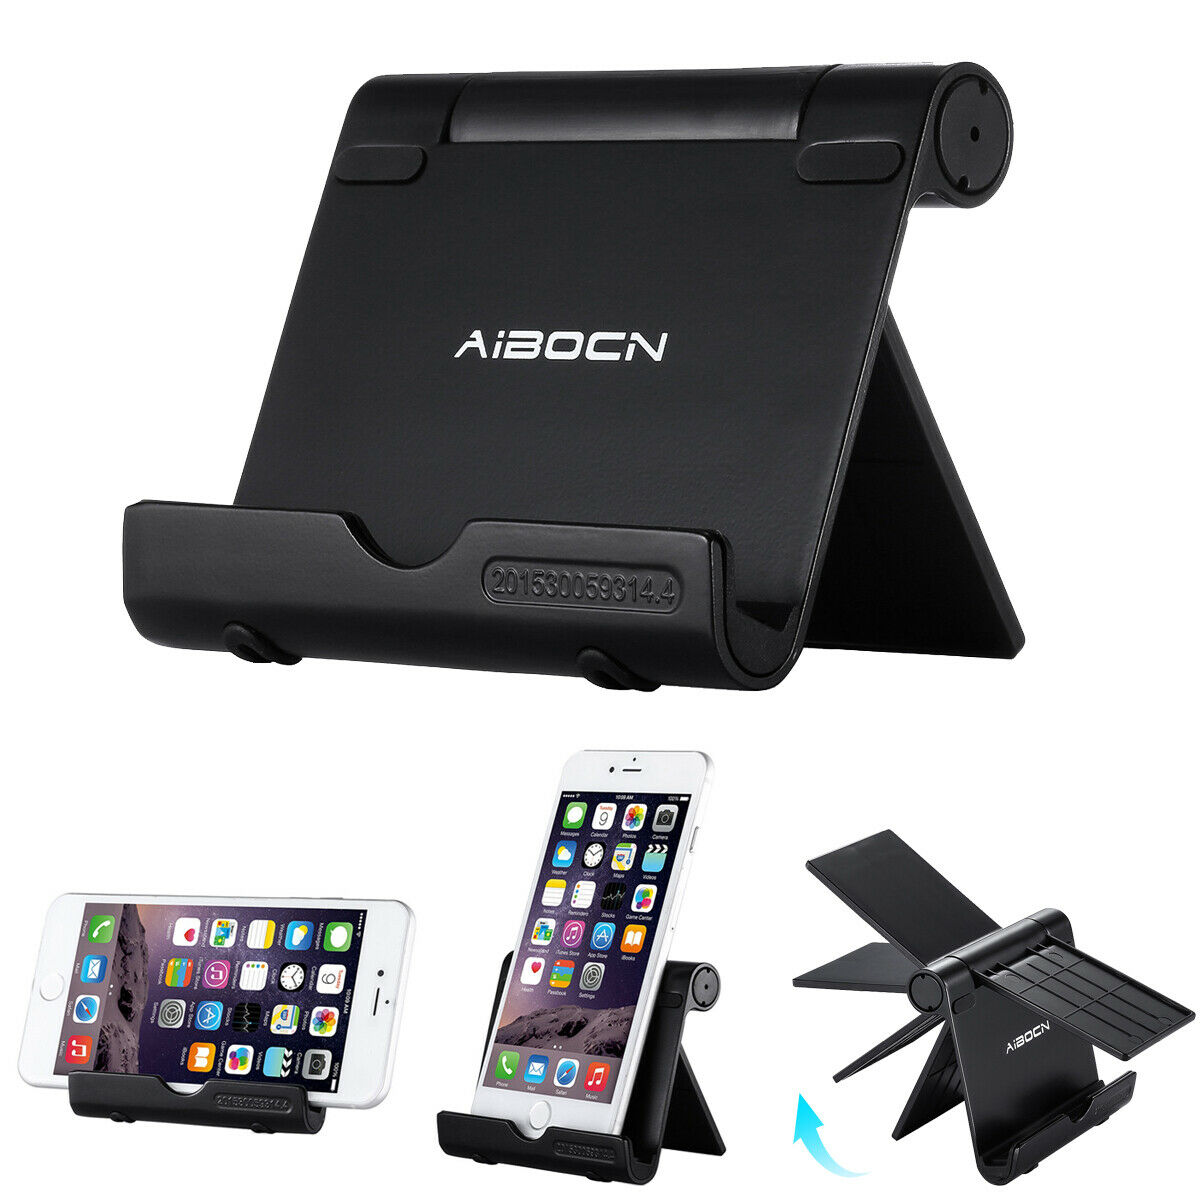 Universal Aluminum Tablet Stand Desktop Holder Mount For Cell Phone Ipad Iphone